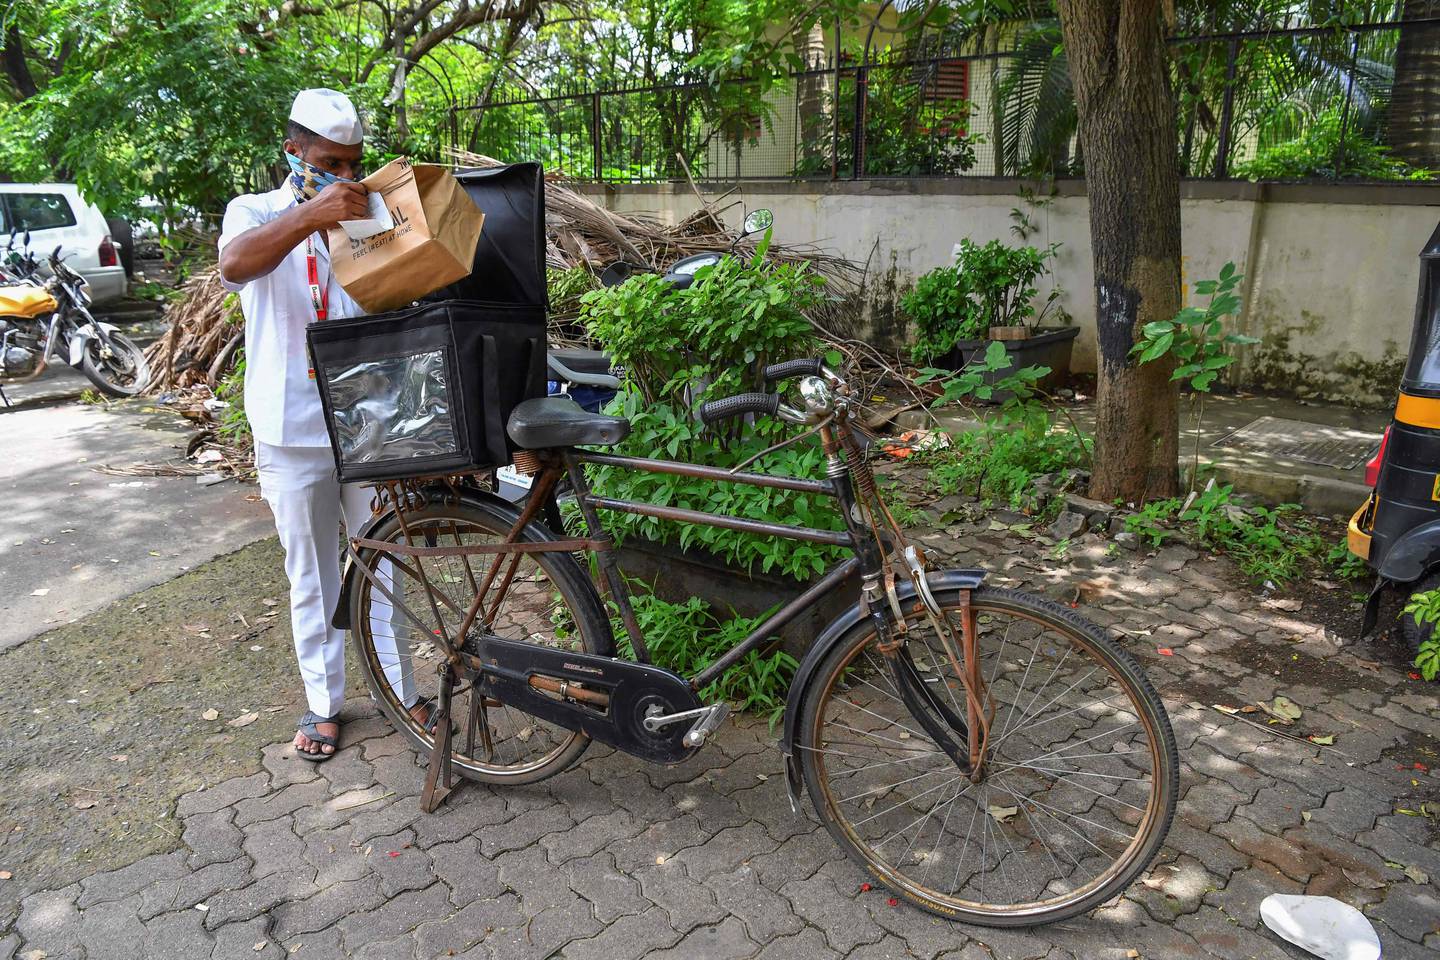 One of Mumbai's tiffin delivery men or "Dabbawallas", Pandurang Jadhav, prepares to deliver an order after collecting it from a restaurant in Mumbai. After the pandemic shut offices and put Mumbai's renowned lunchbox deliverymen out of work, the 130-year-old tiffin delivery network tied up with a restaurant chain, on June 22, 2021, in Mumbai, India. AFP